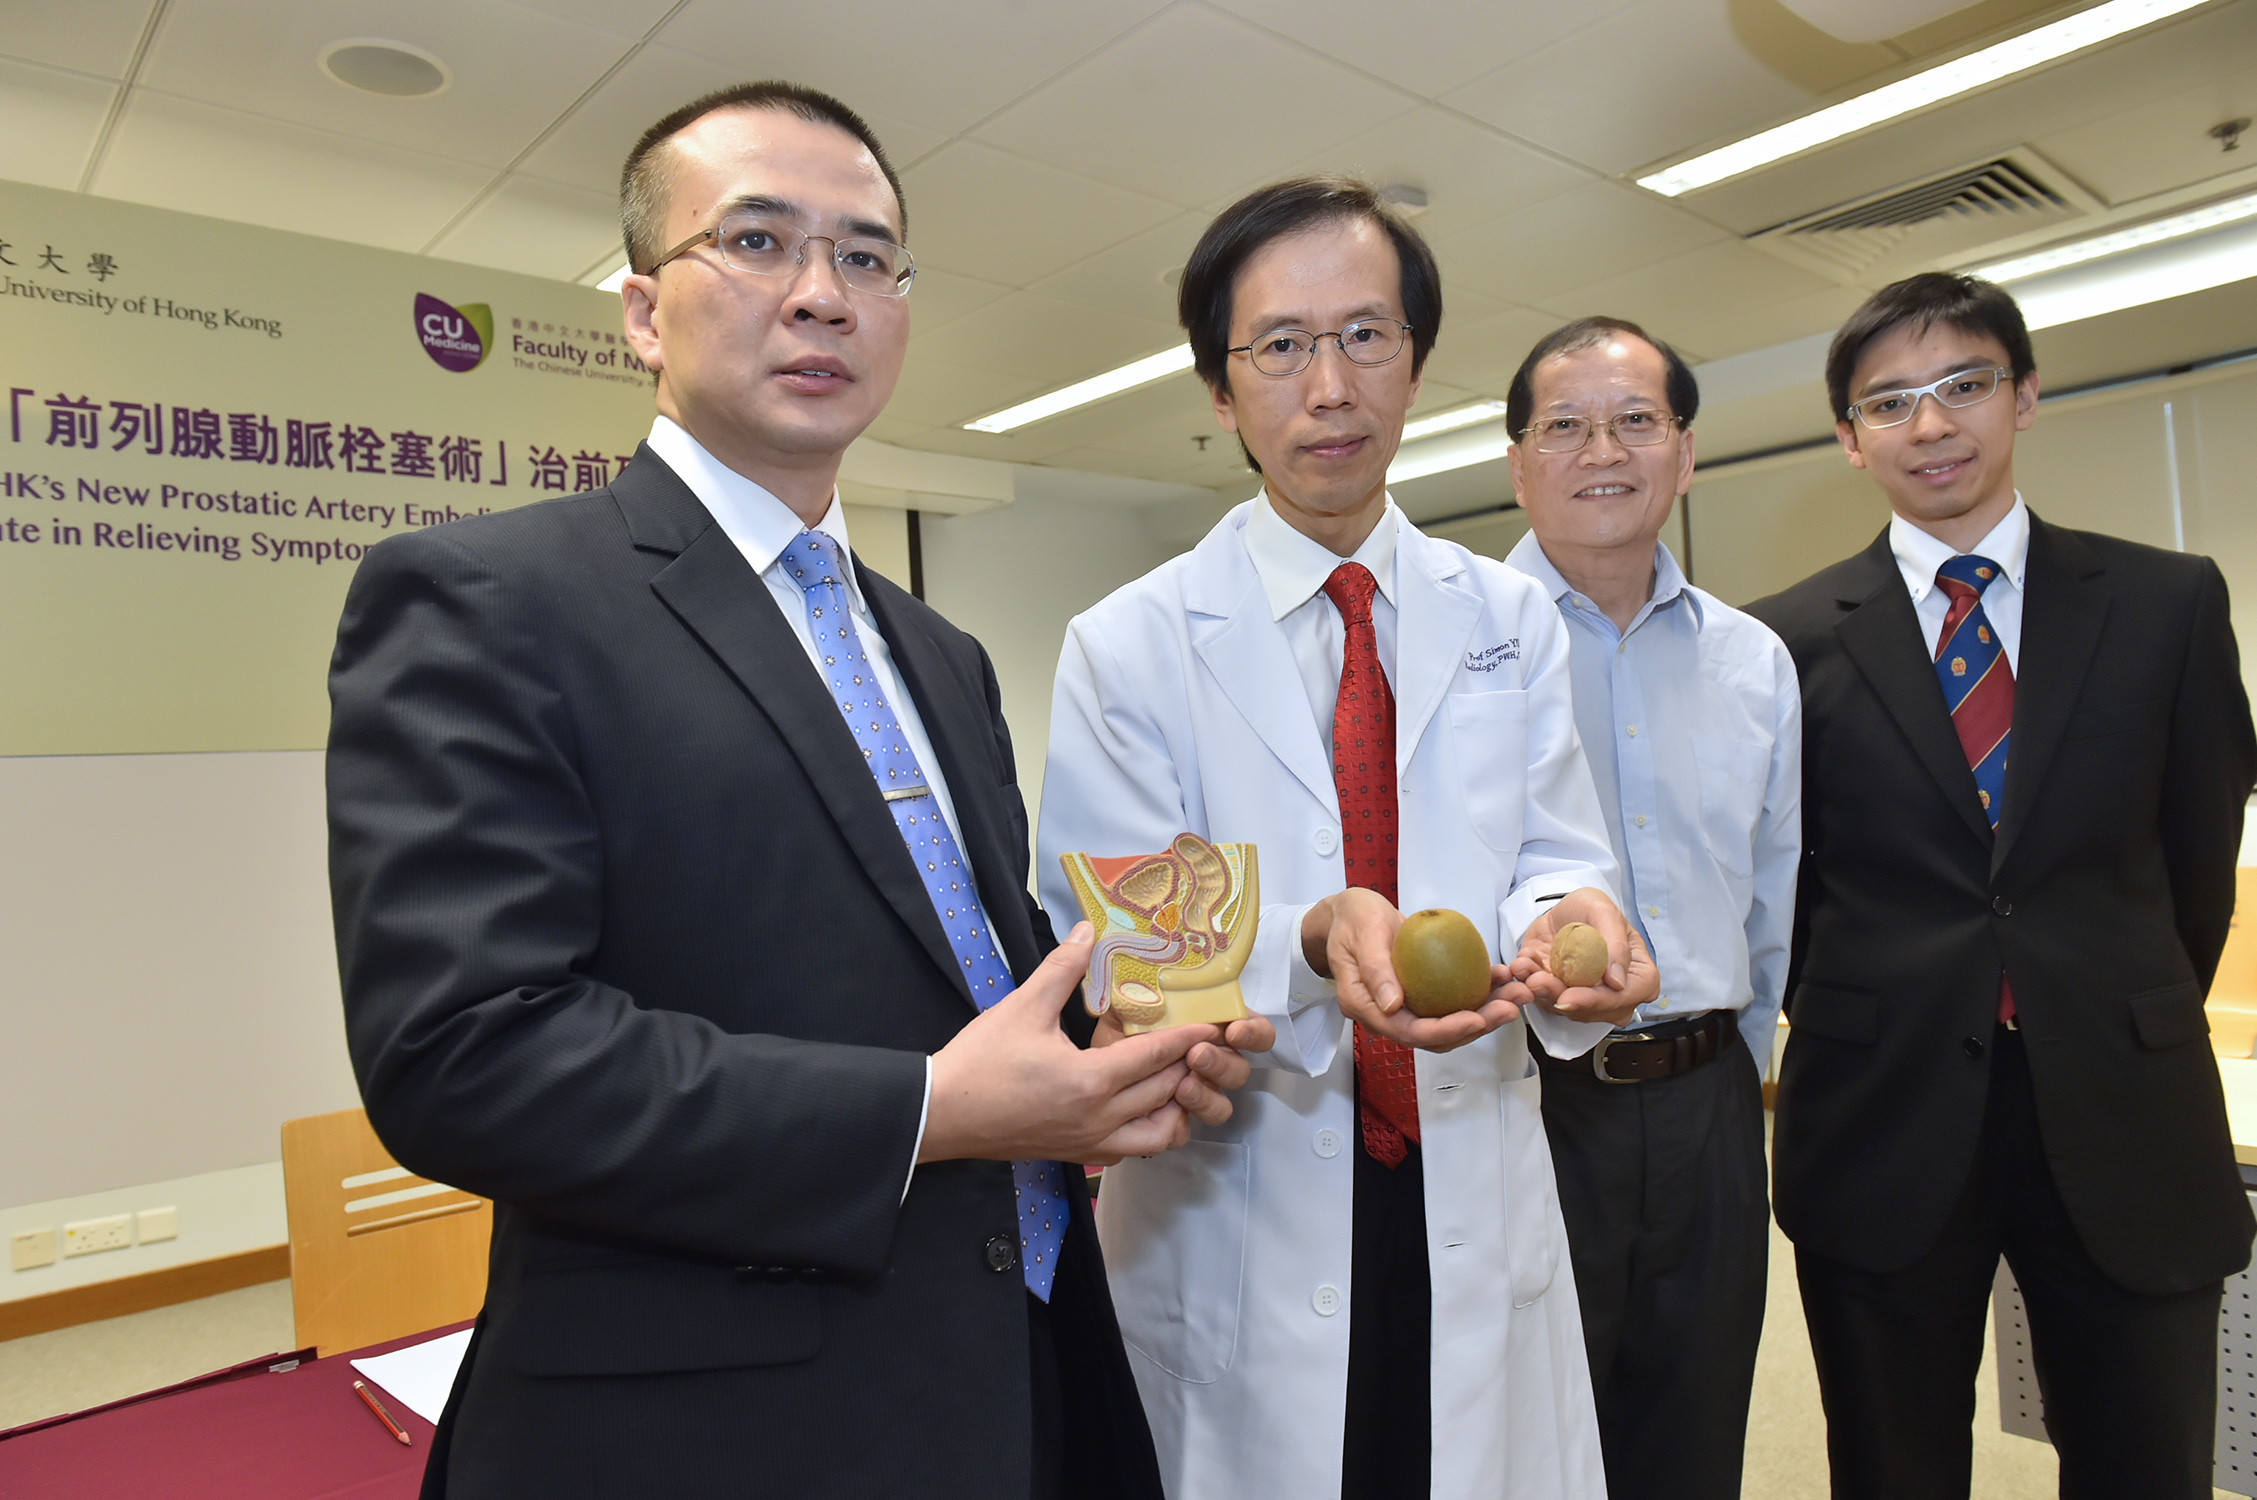 Prof. Simon Chun Ho YU (2nd left), Chairman, Department of Imaging and Interventional Radiology